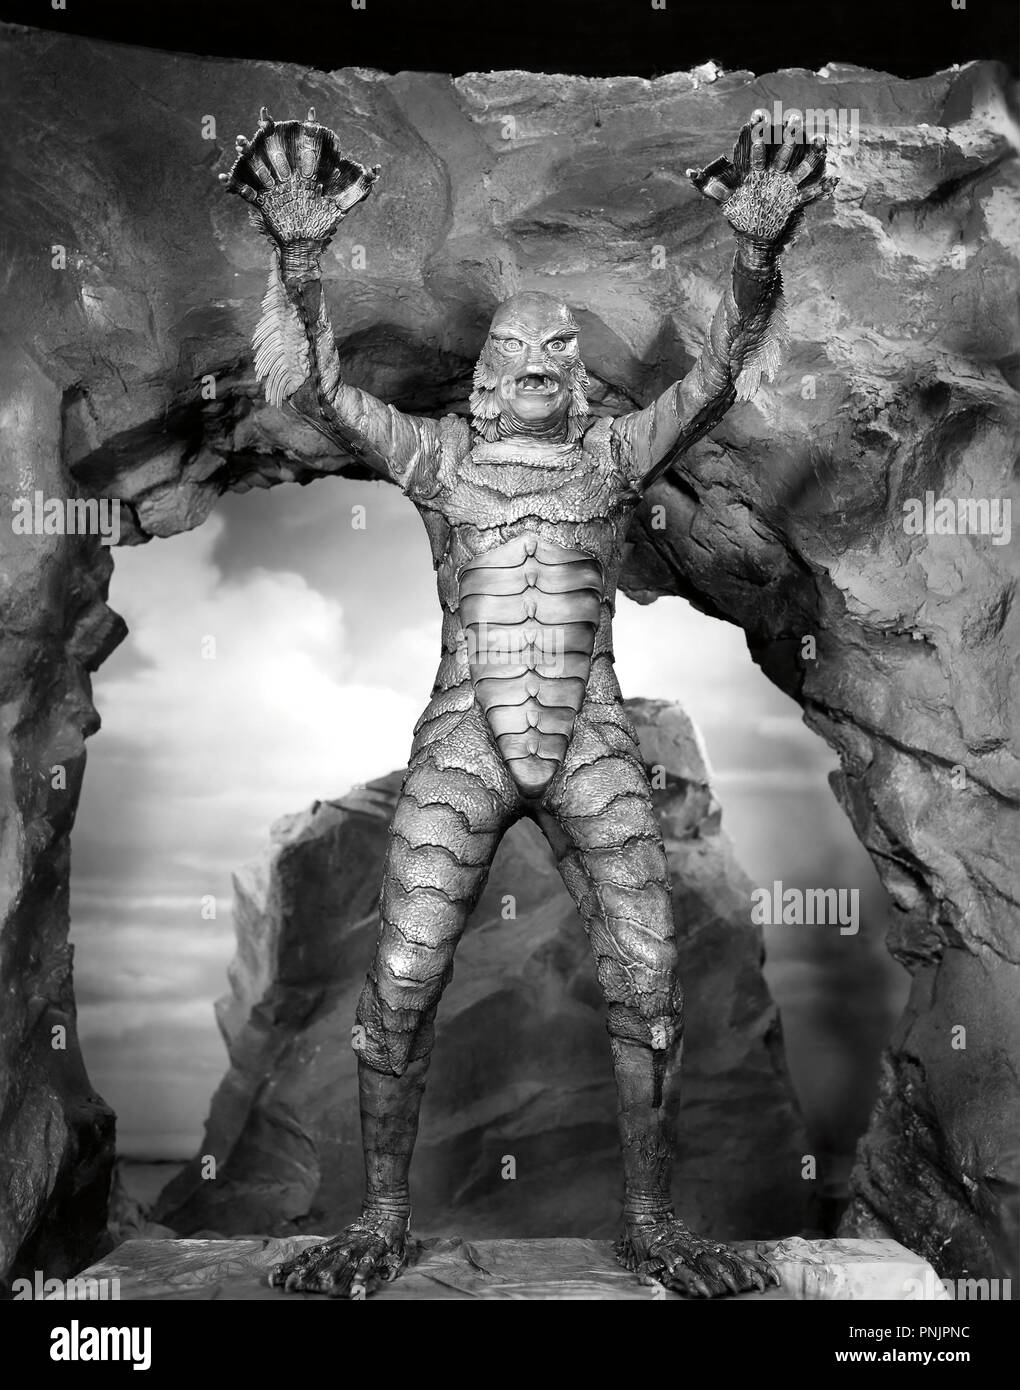 Original film title: CREATURE FROM THE BLACK LAGOON. English title: CREATURE FROM THE BLACK LAGOON. Year: 1954. Director: JACK ARNOLD. Credit: UNIVERSAL PICTURES / Album Stock Photo